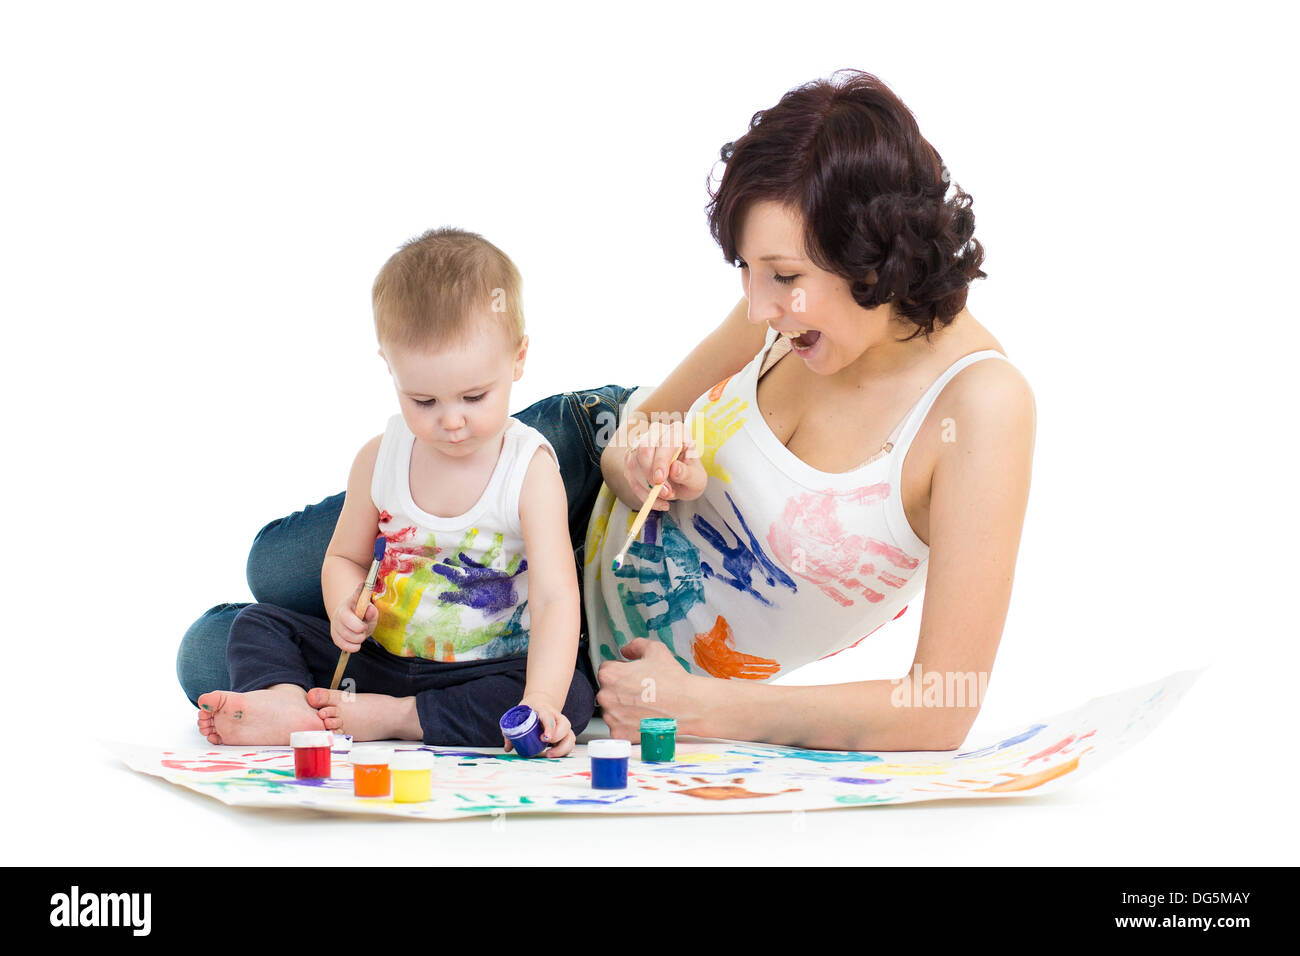 mother wih kid boy drawing and painting together Stock Photo